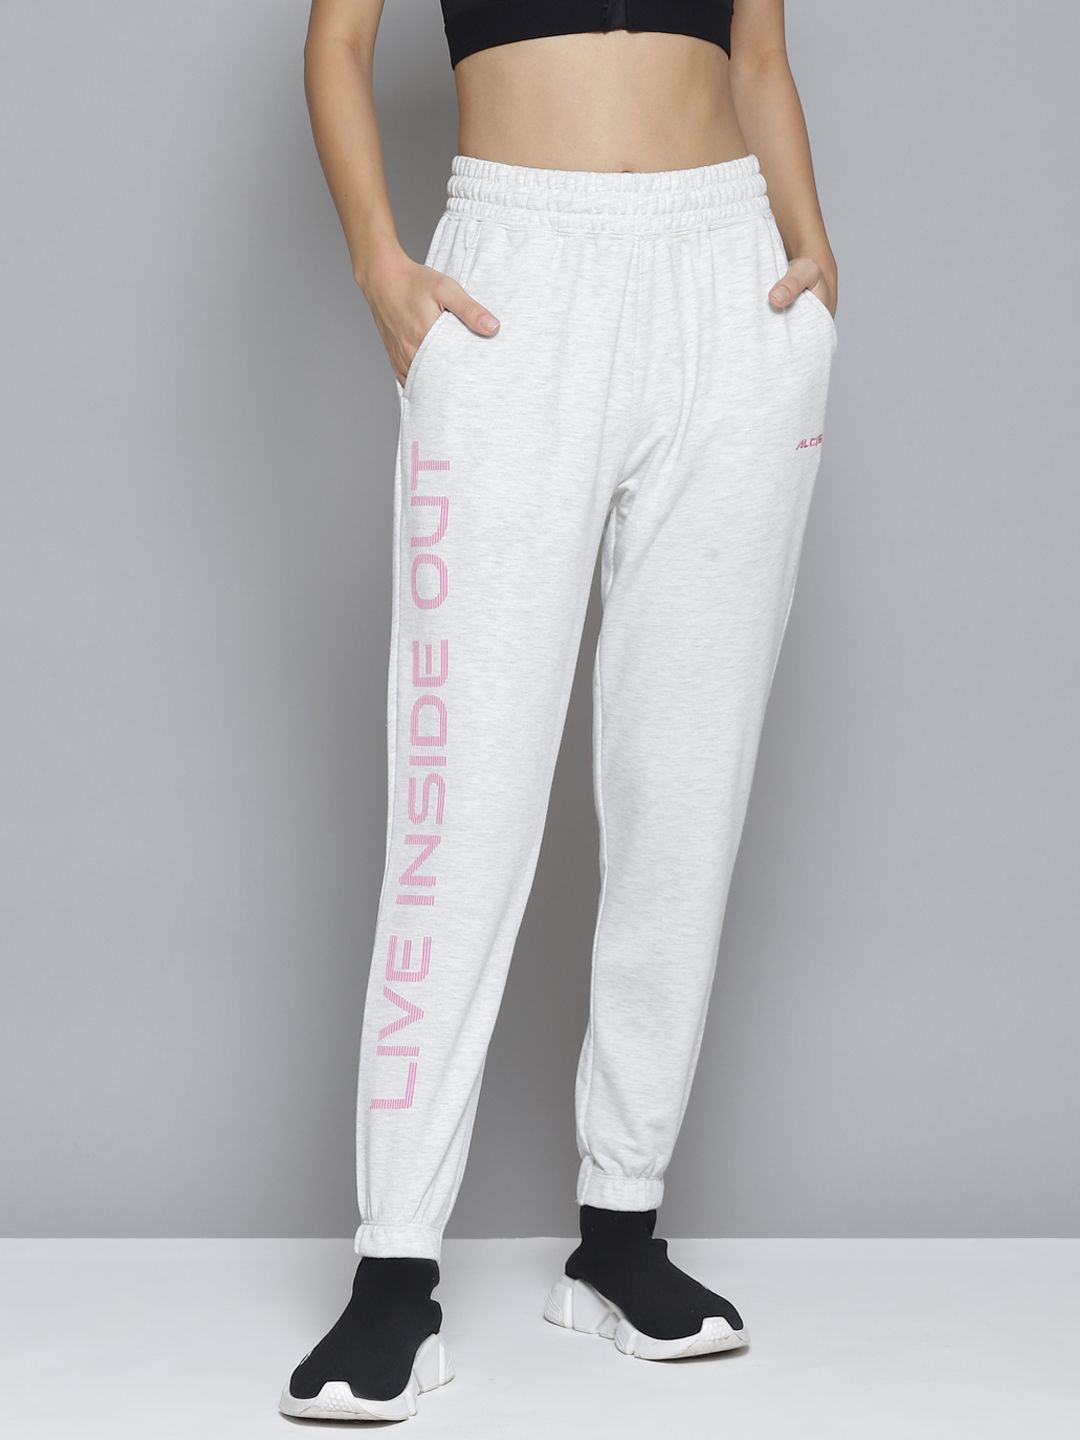 Alcis Women White Printed Slim-Fit Joggers Price in India